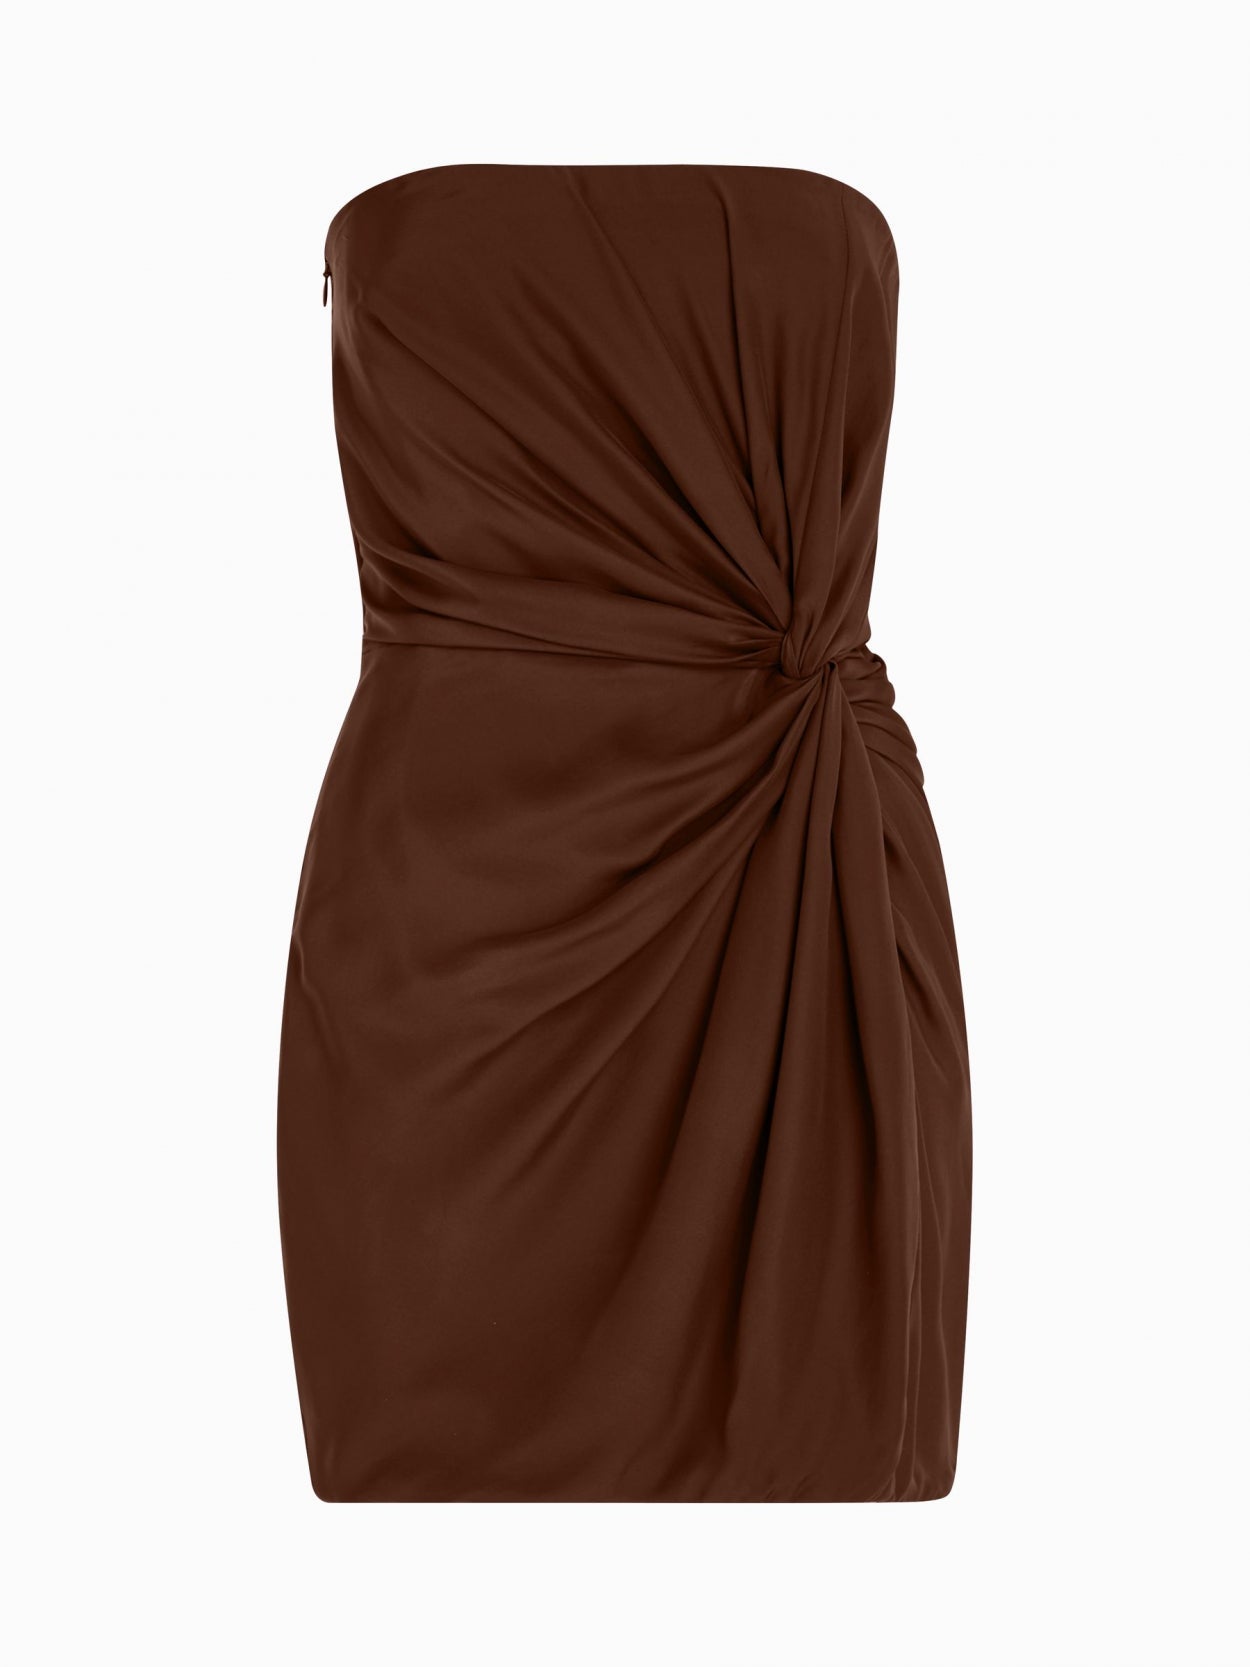 front packshot of a brown mini silk dress with knot detail